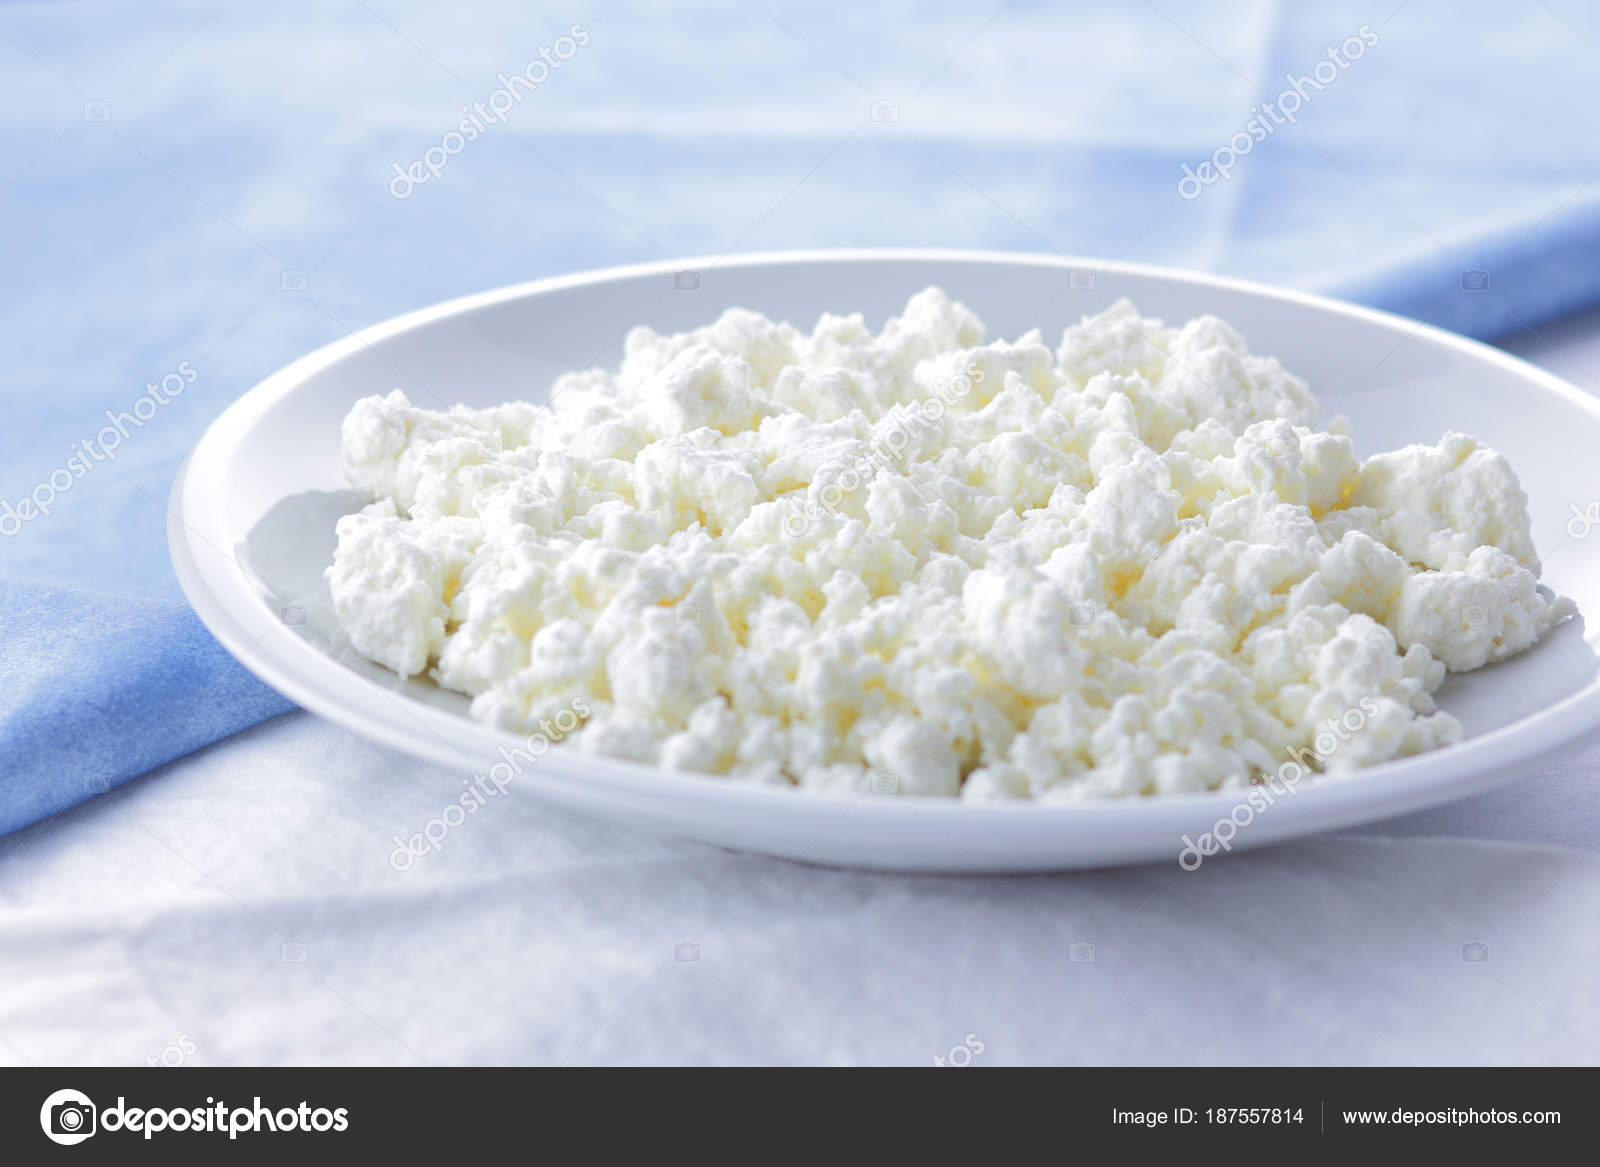 Cheese Fresh Cottage Cheese White Plate Goat Curd Blue Napkin